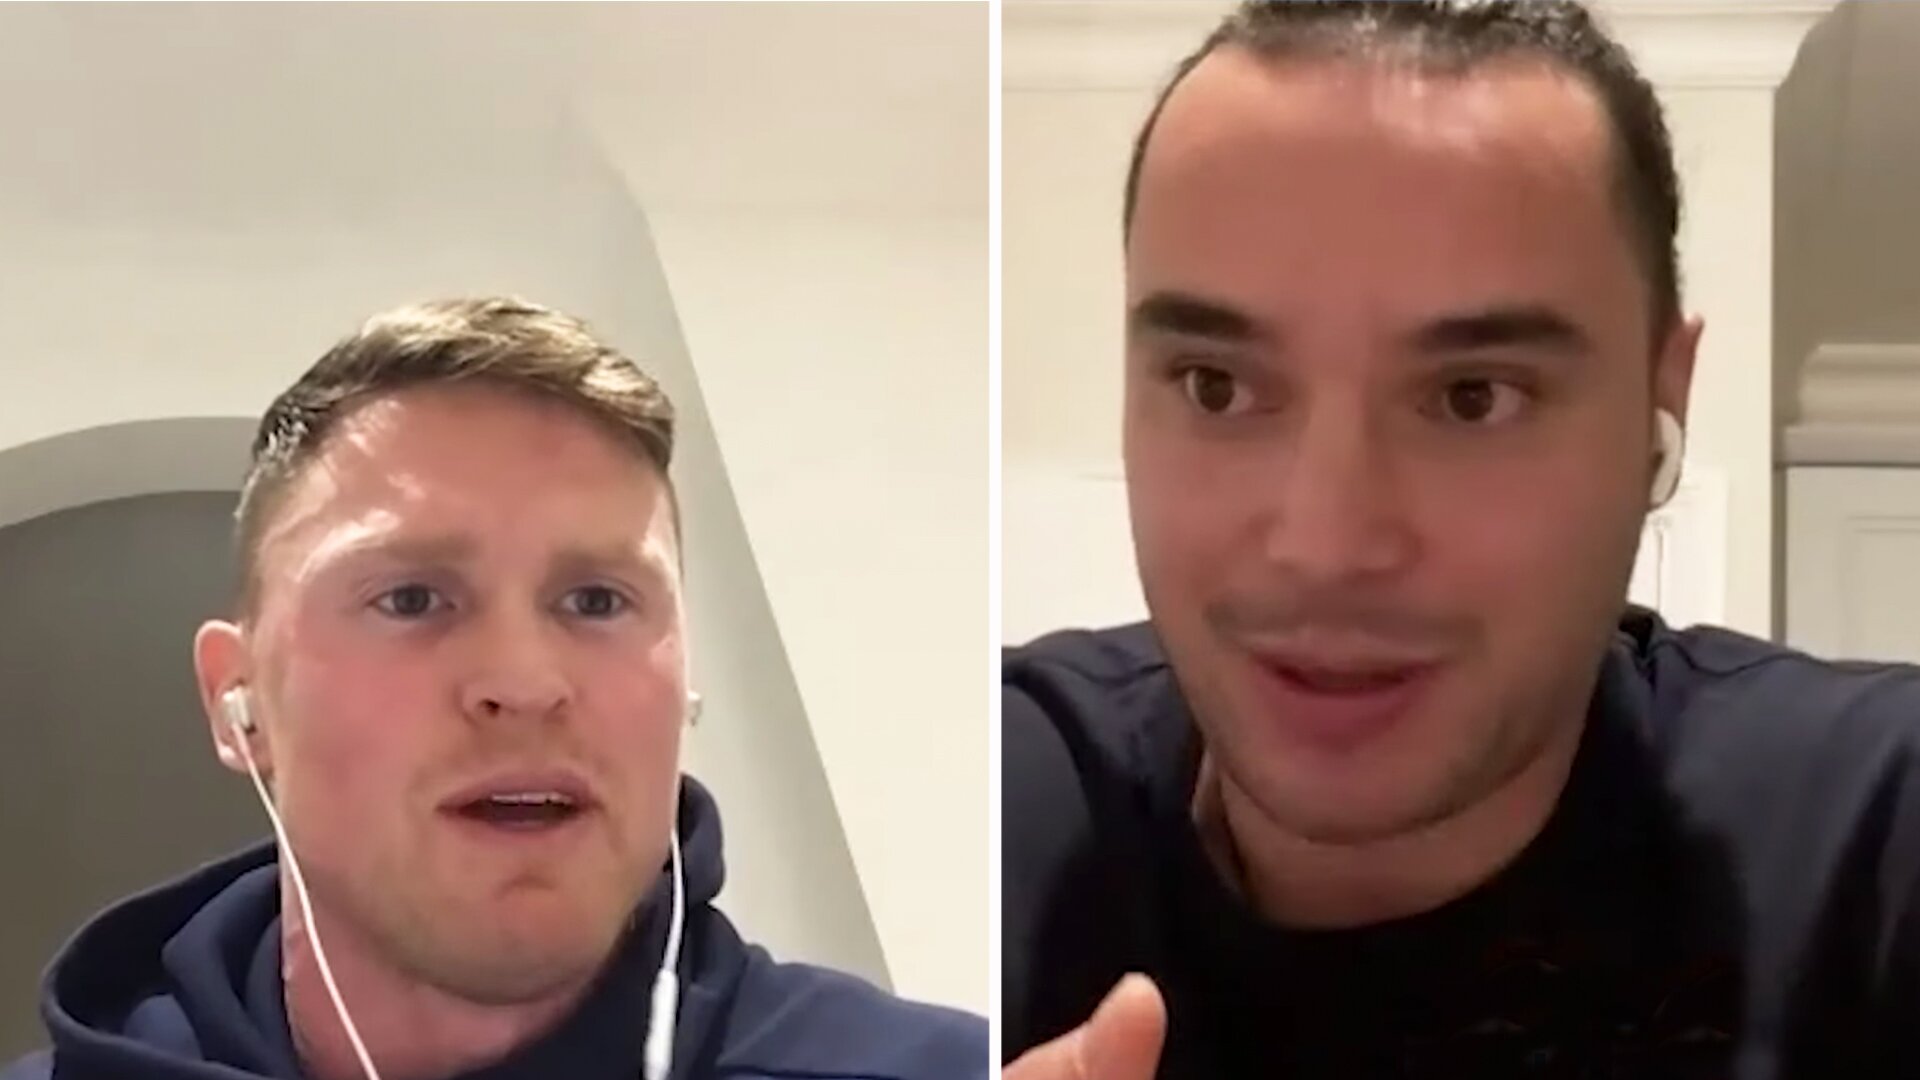 Chris Ashton and James Lowe have it out after 'too big and too slow' comments in tense exchange